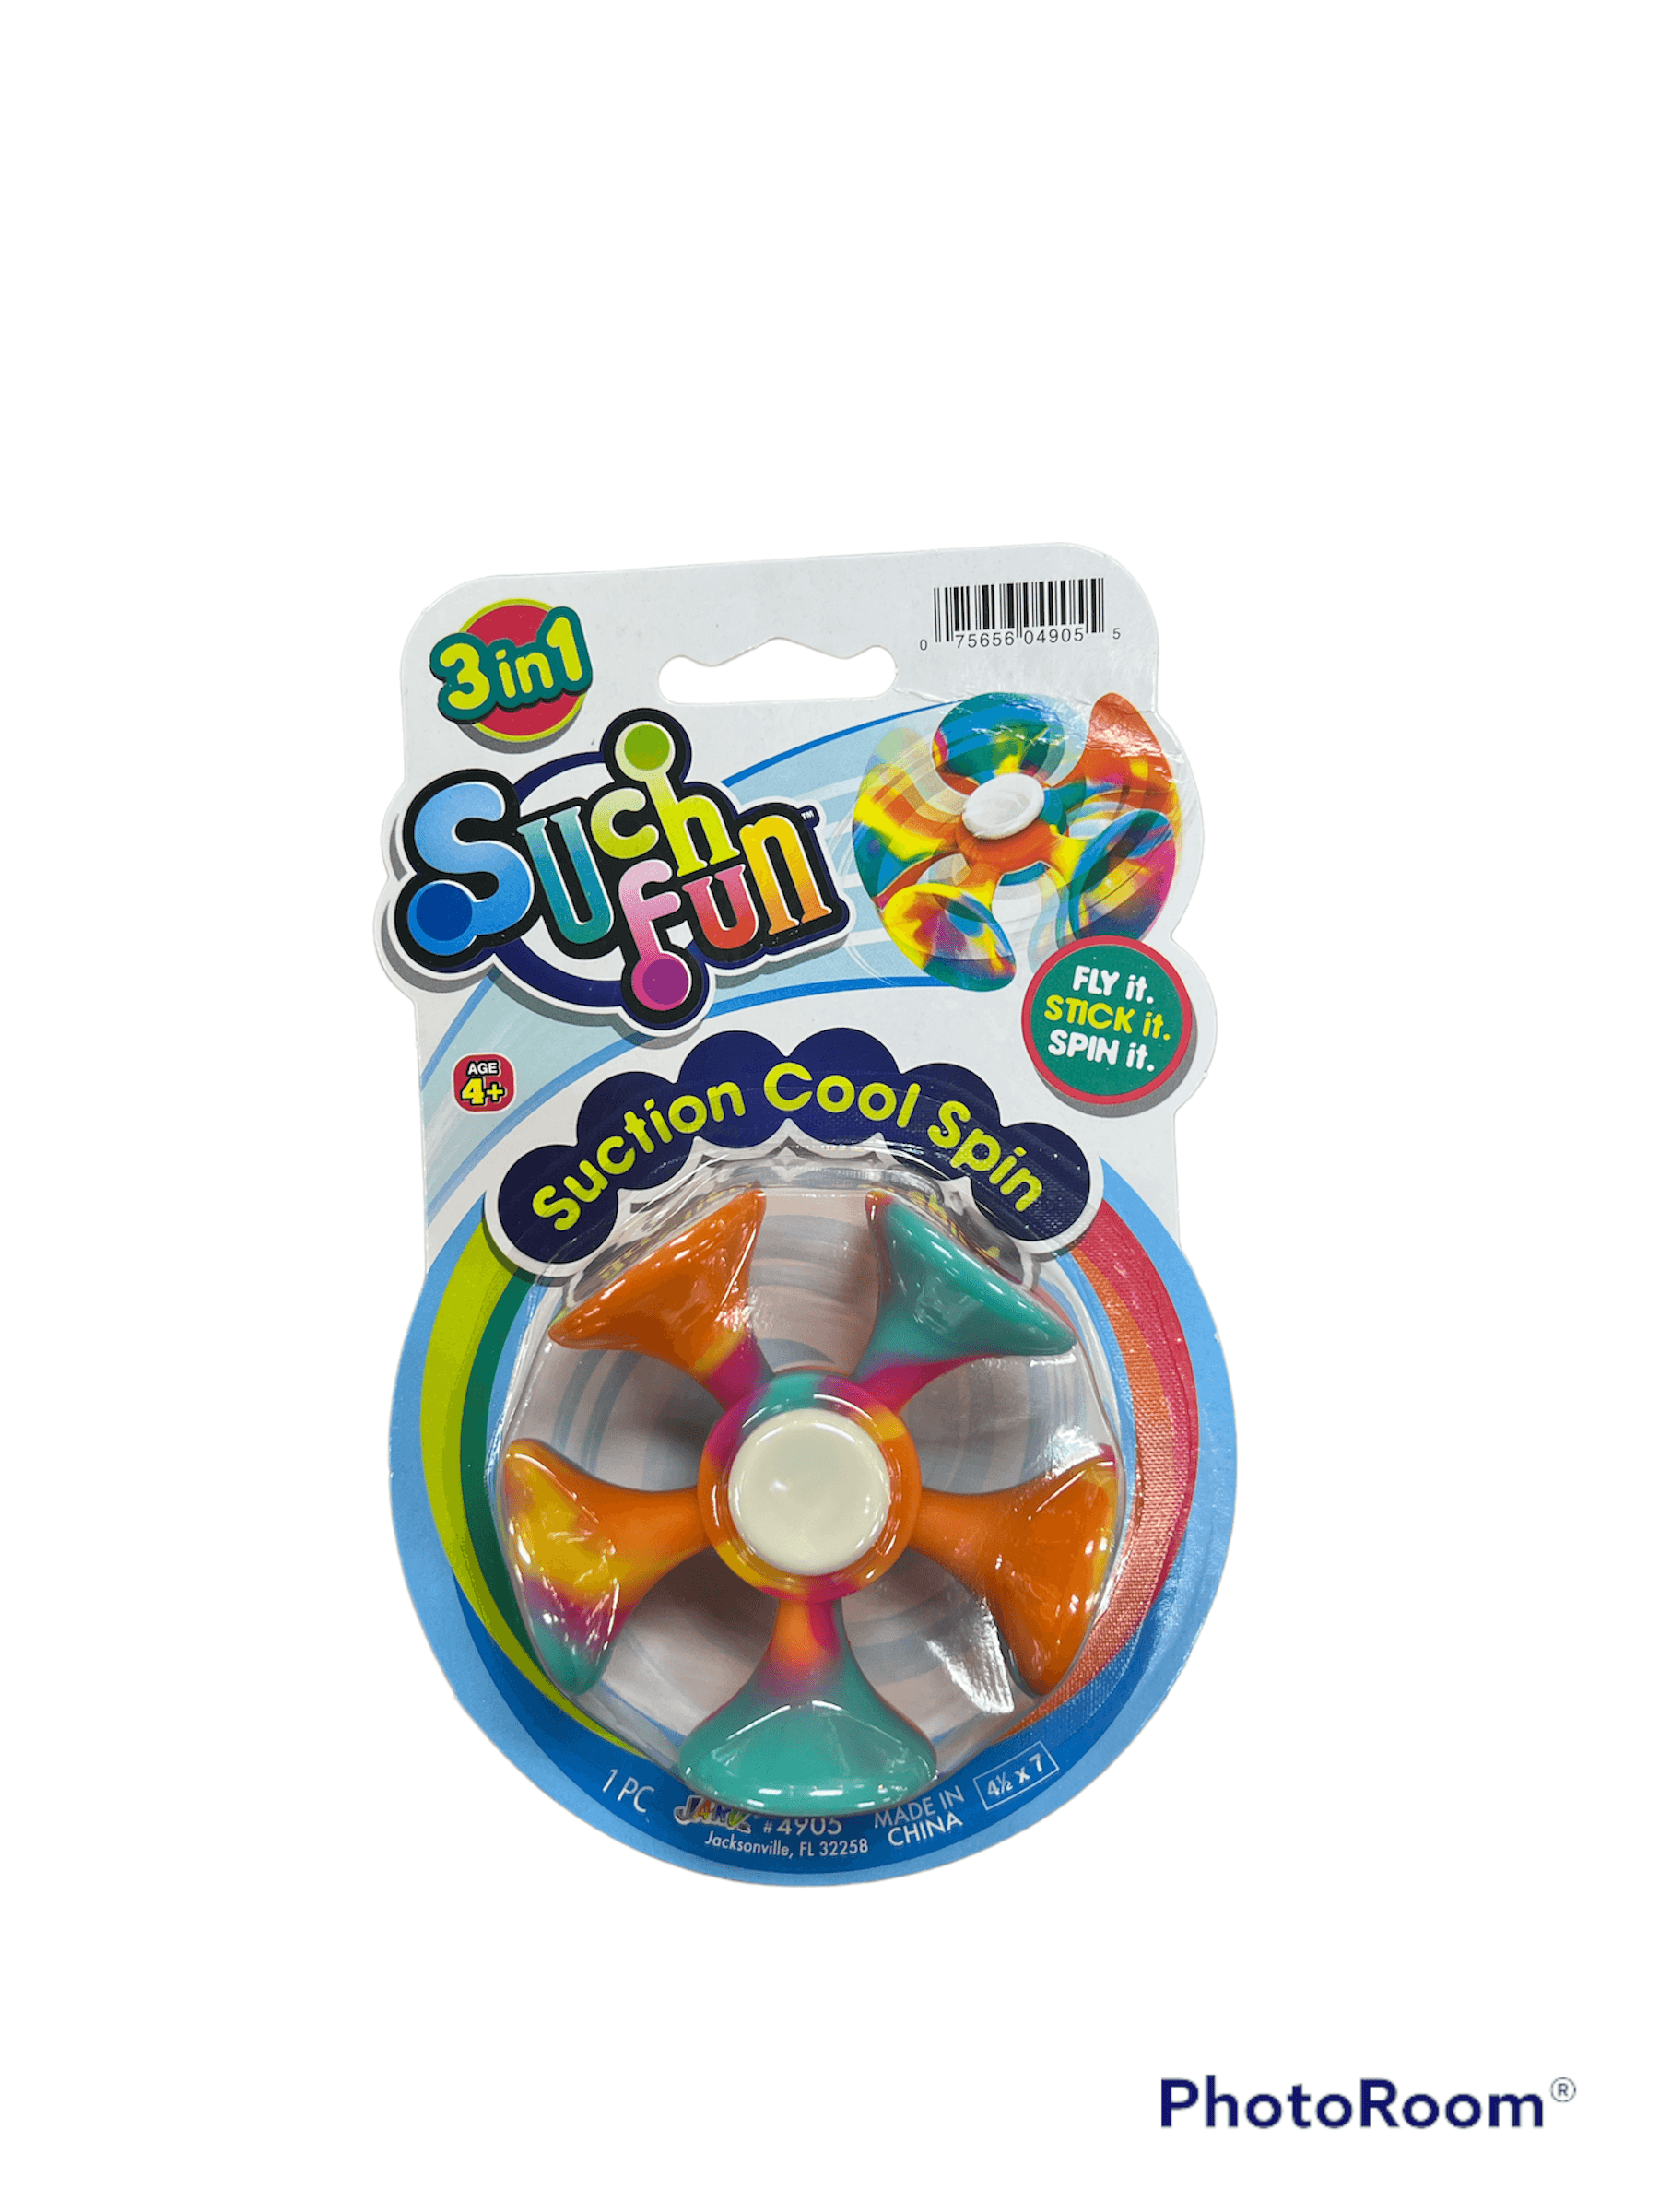 Such Fun Suction Cool Spin